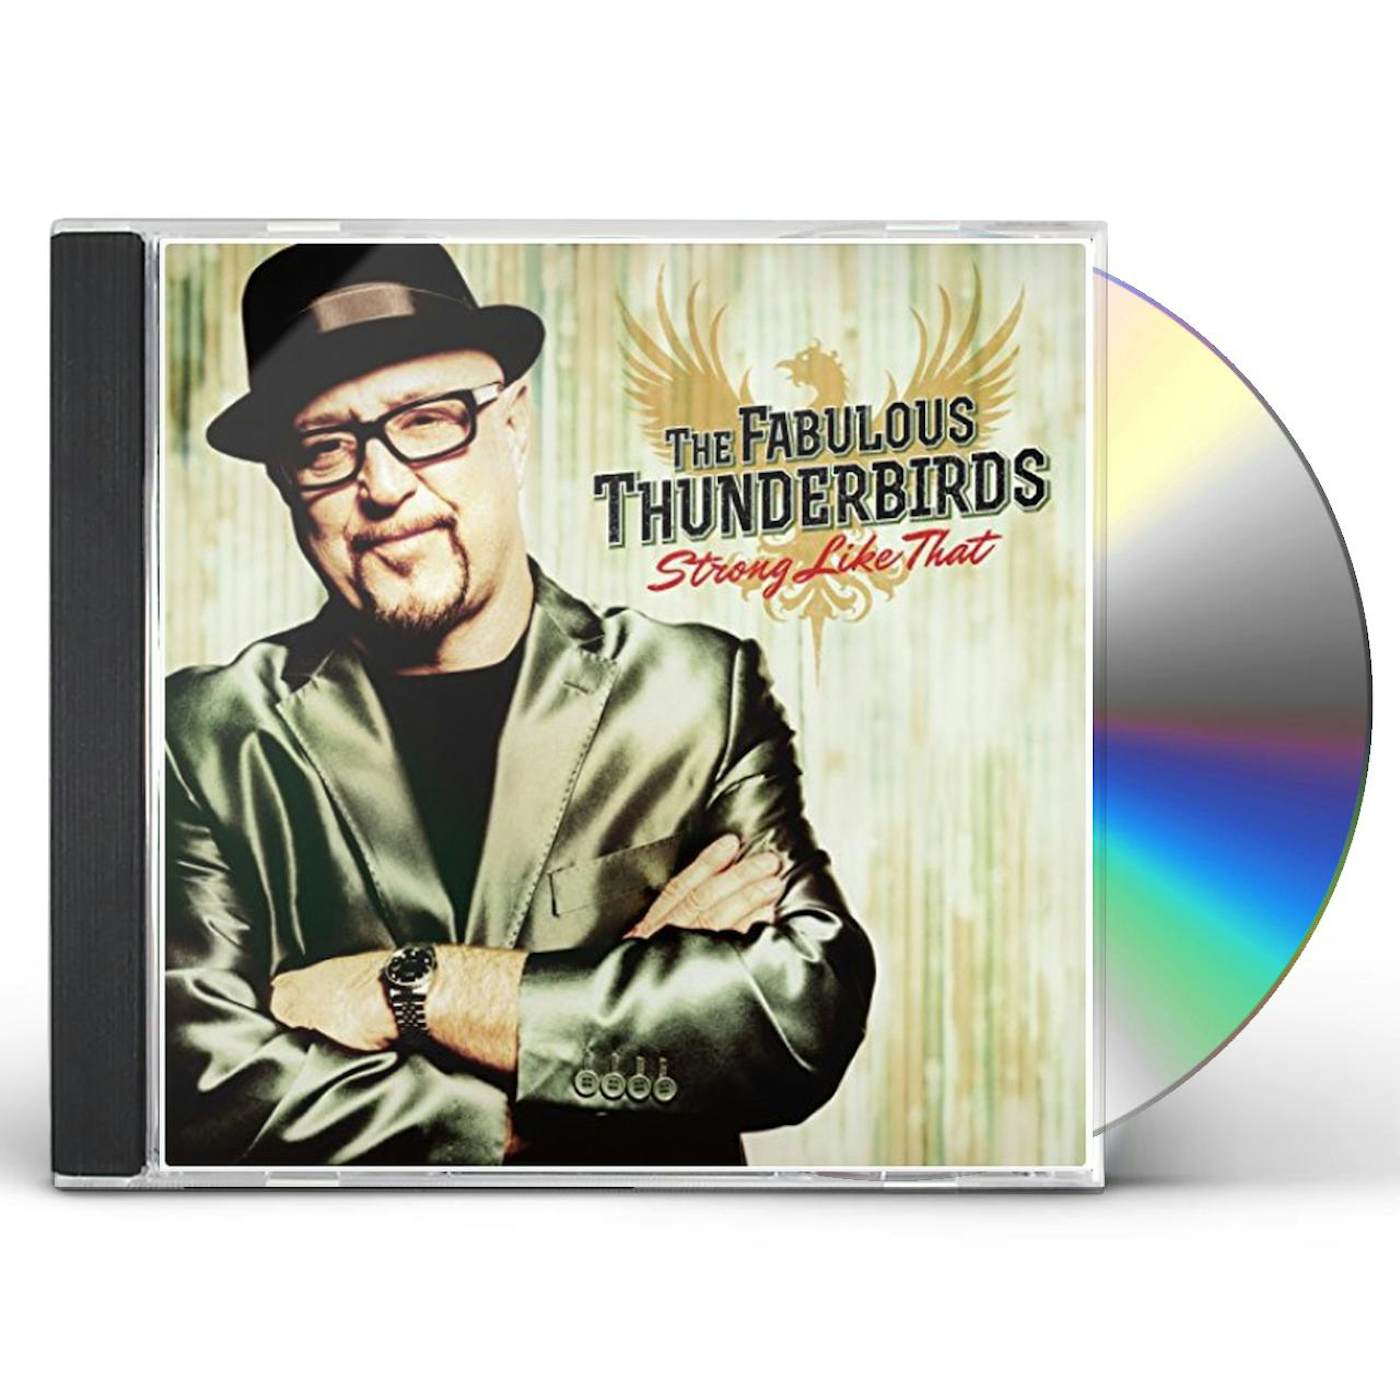 The Fabulous Thunderbirds STRONG LIKE THAT CD